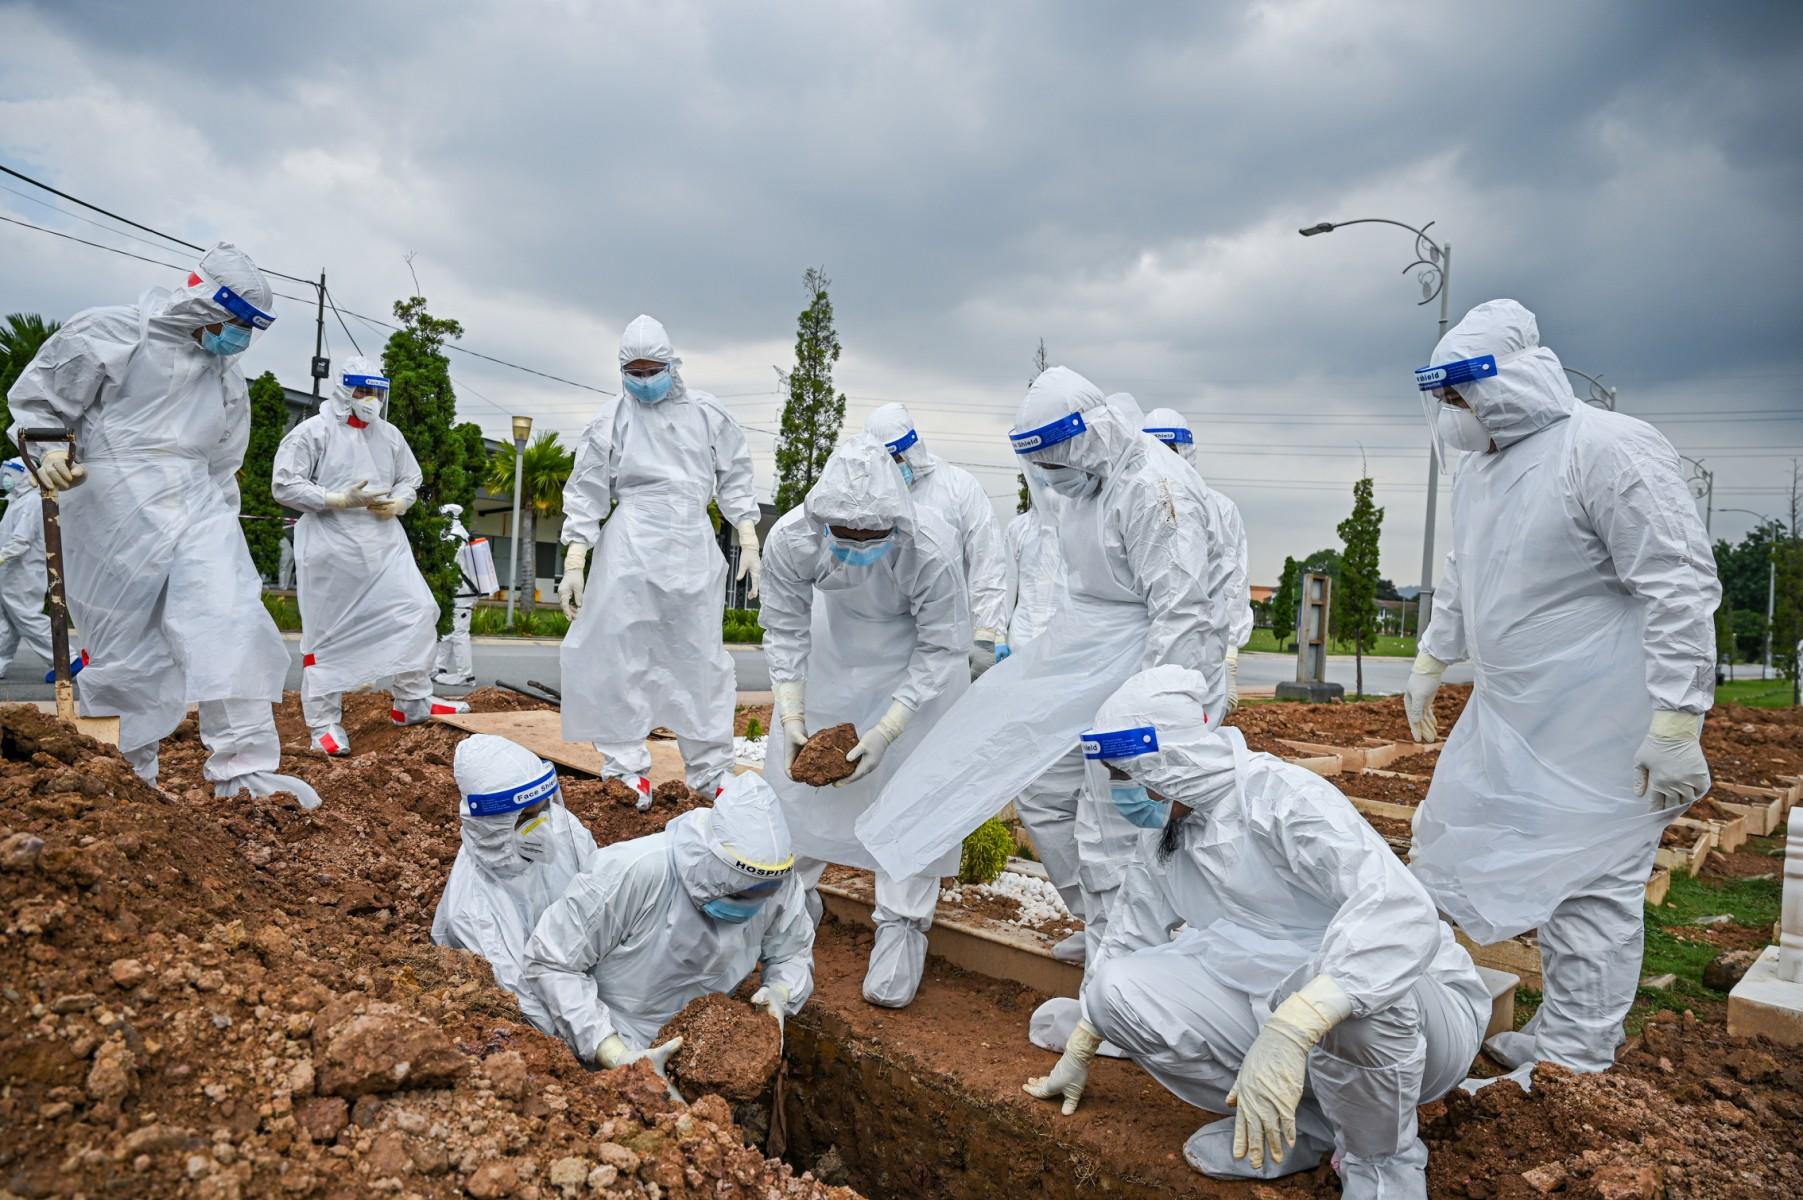 Volunteers wearing protective suits bury a Covid-19 victim at a cemetery in Kuala Lumpur on June 15. Photo: AFP